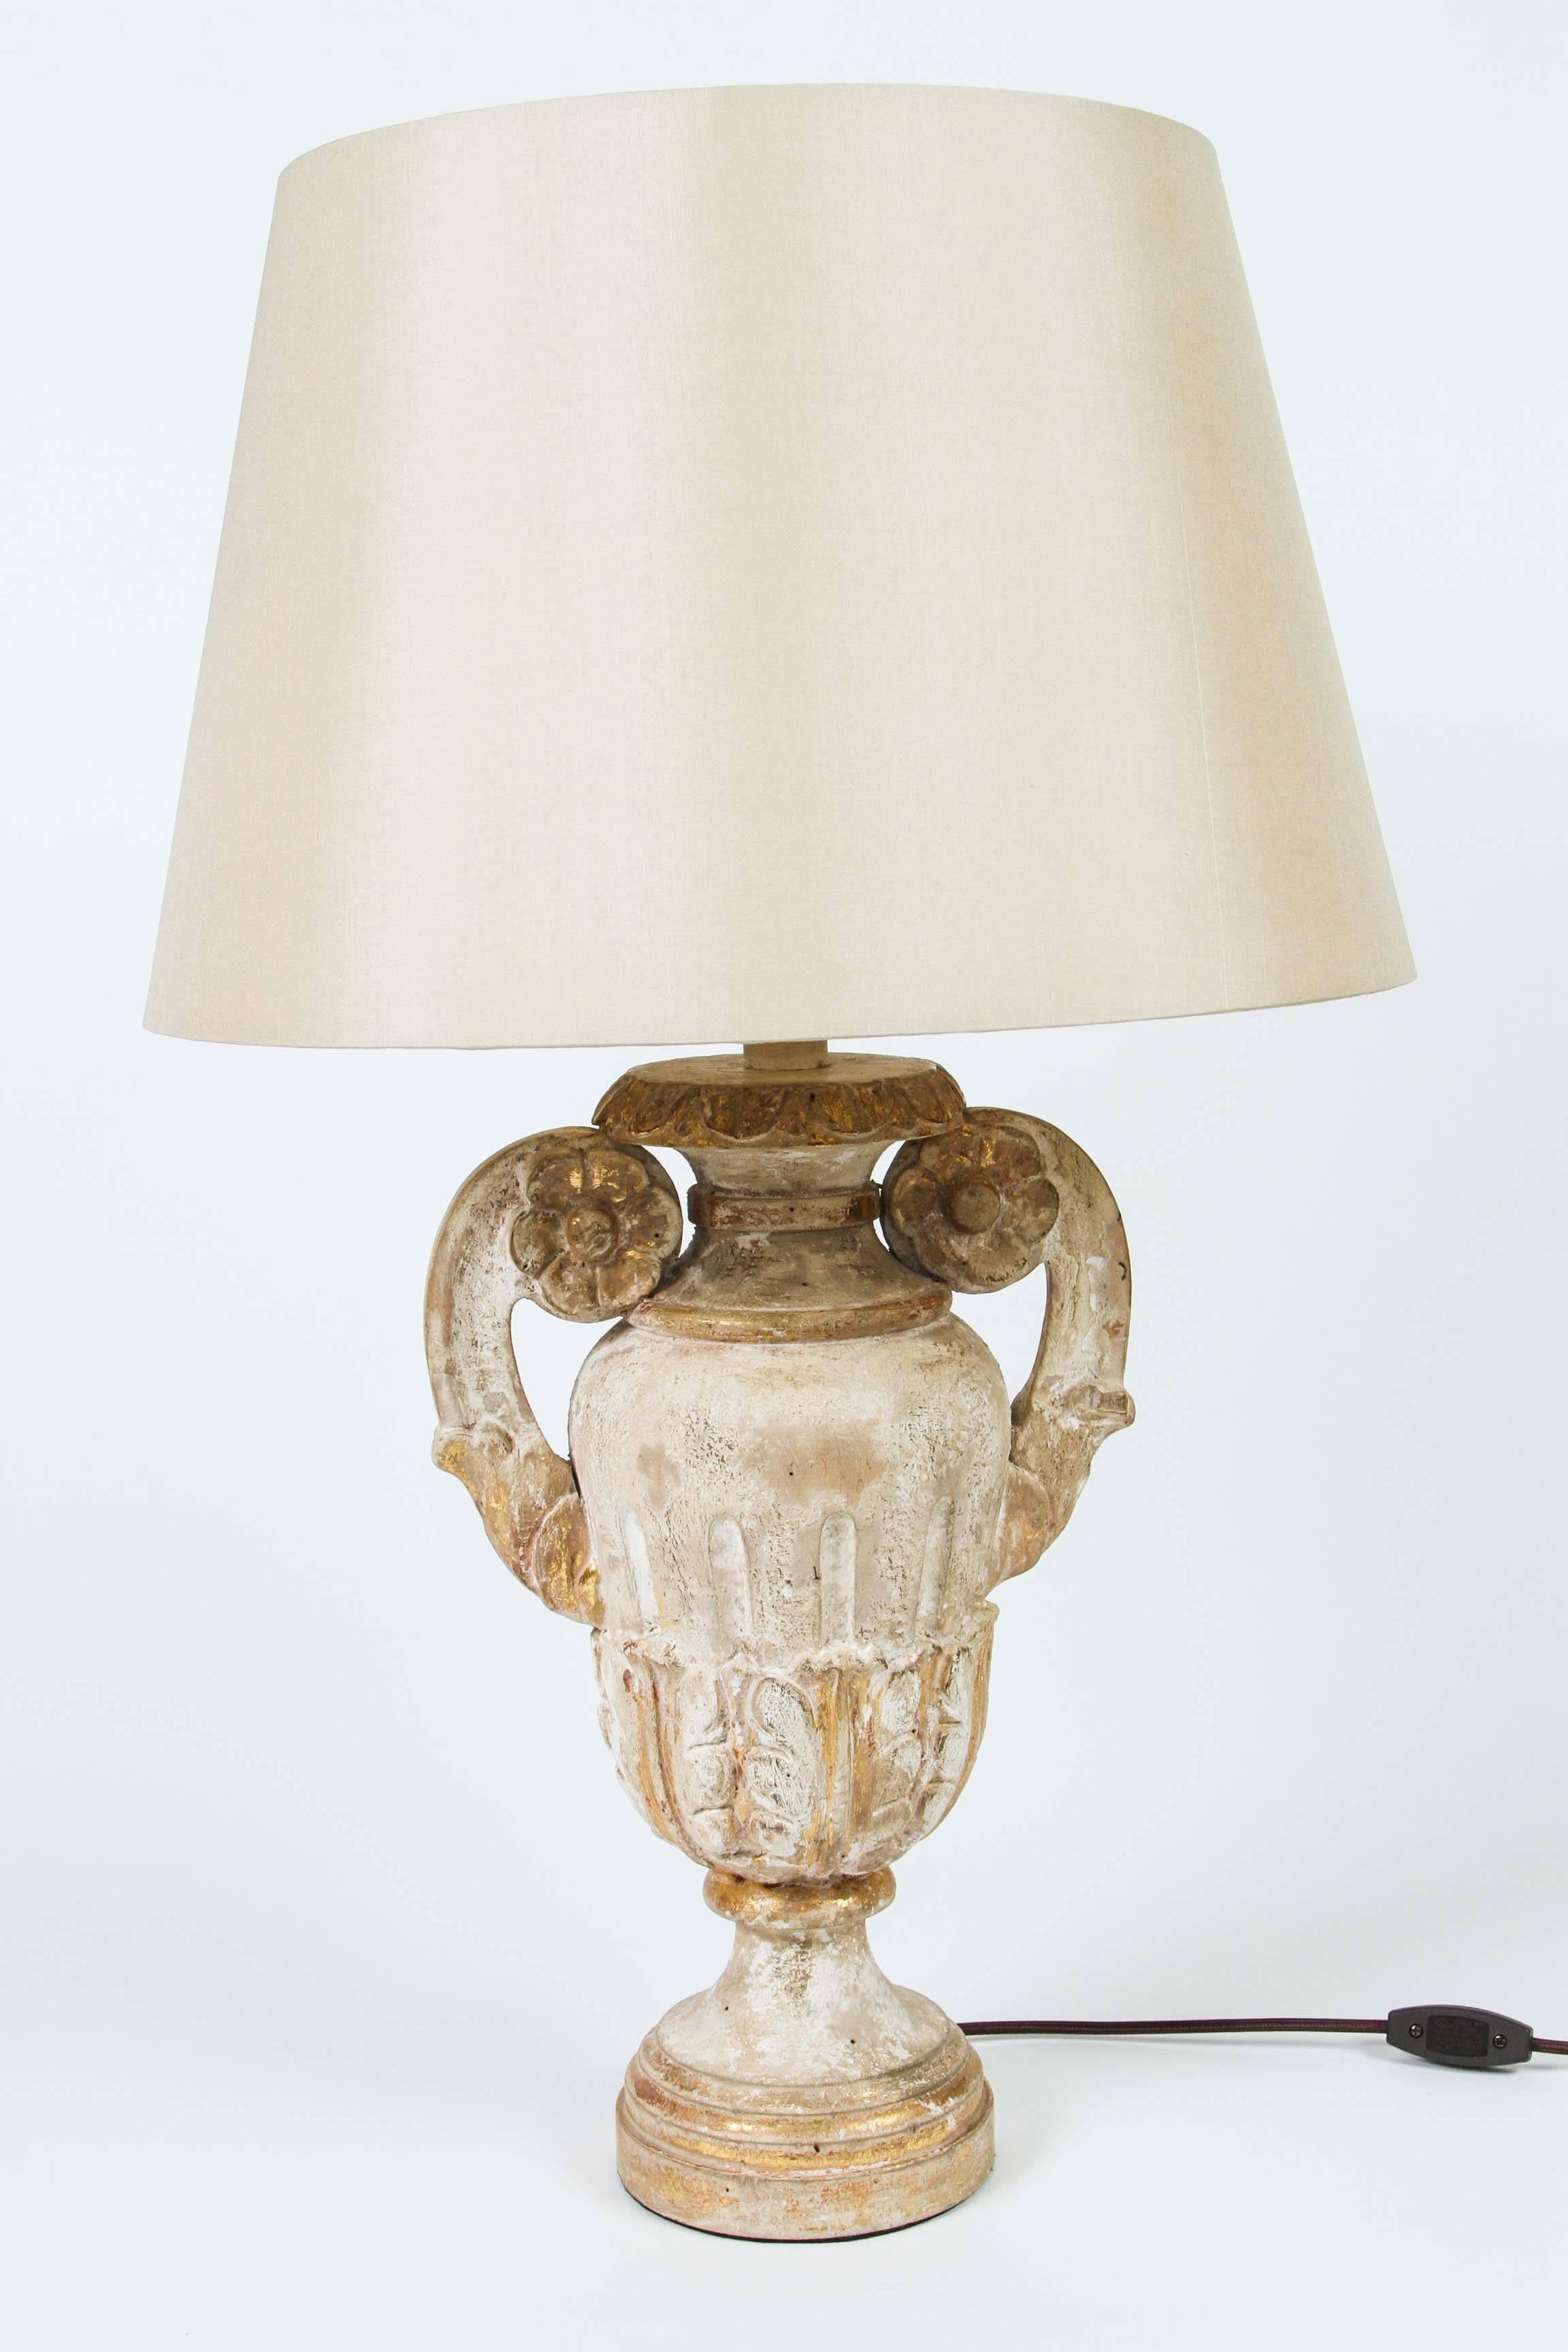 A Pair of Italian Urns, 19th c. converted to Table Lamps For Sale 3